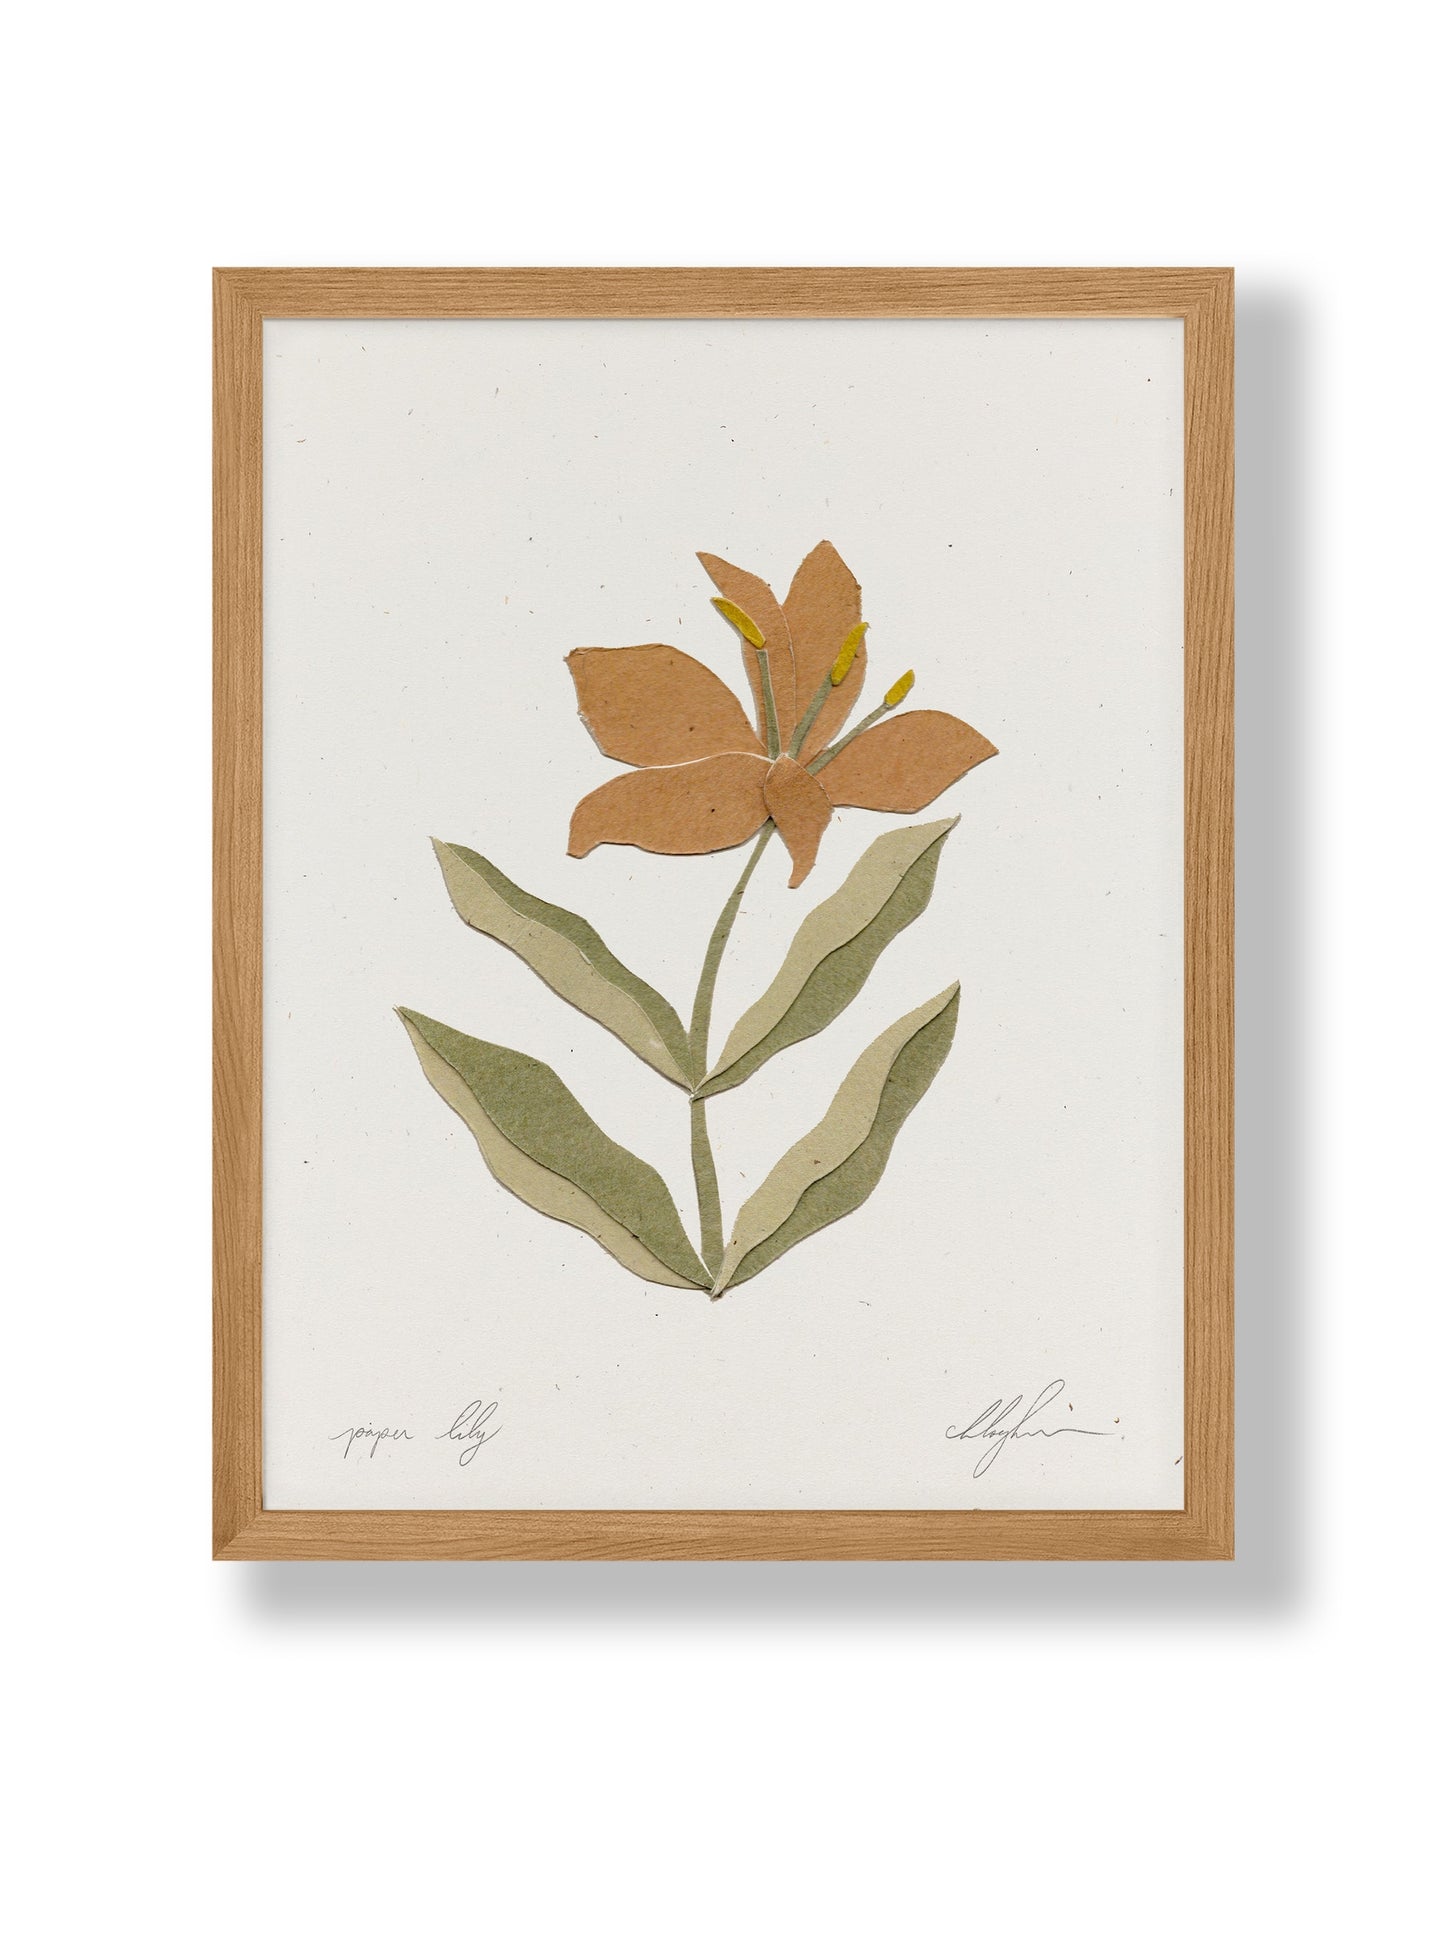 Paper Lily by Coco Shalom. Prints are made with 100% recycled paper, containing 30% post consumer waste, produced with 100% green power and 0% BS.